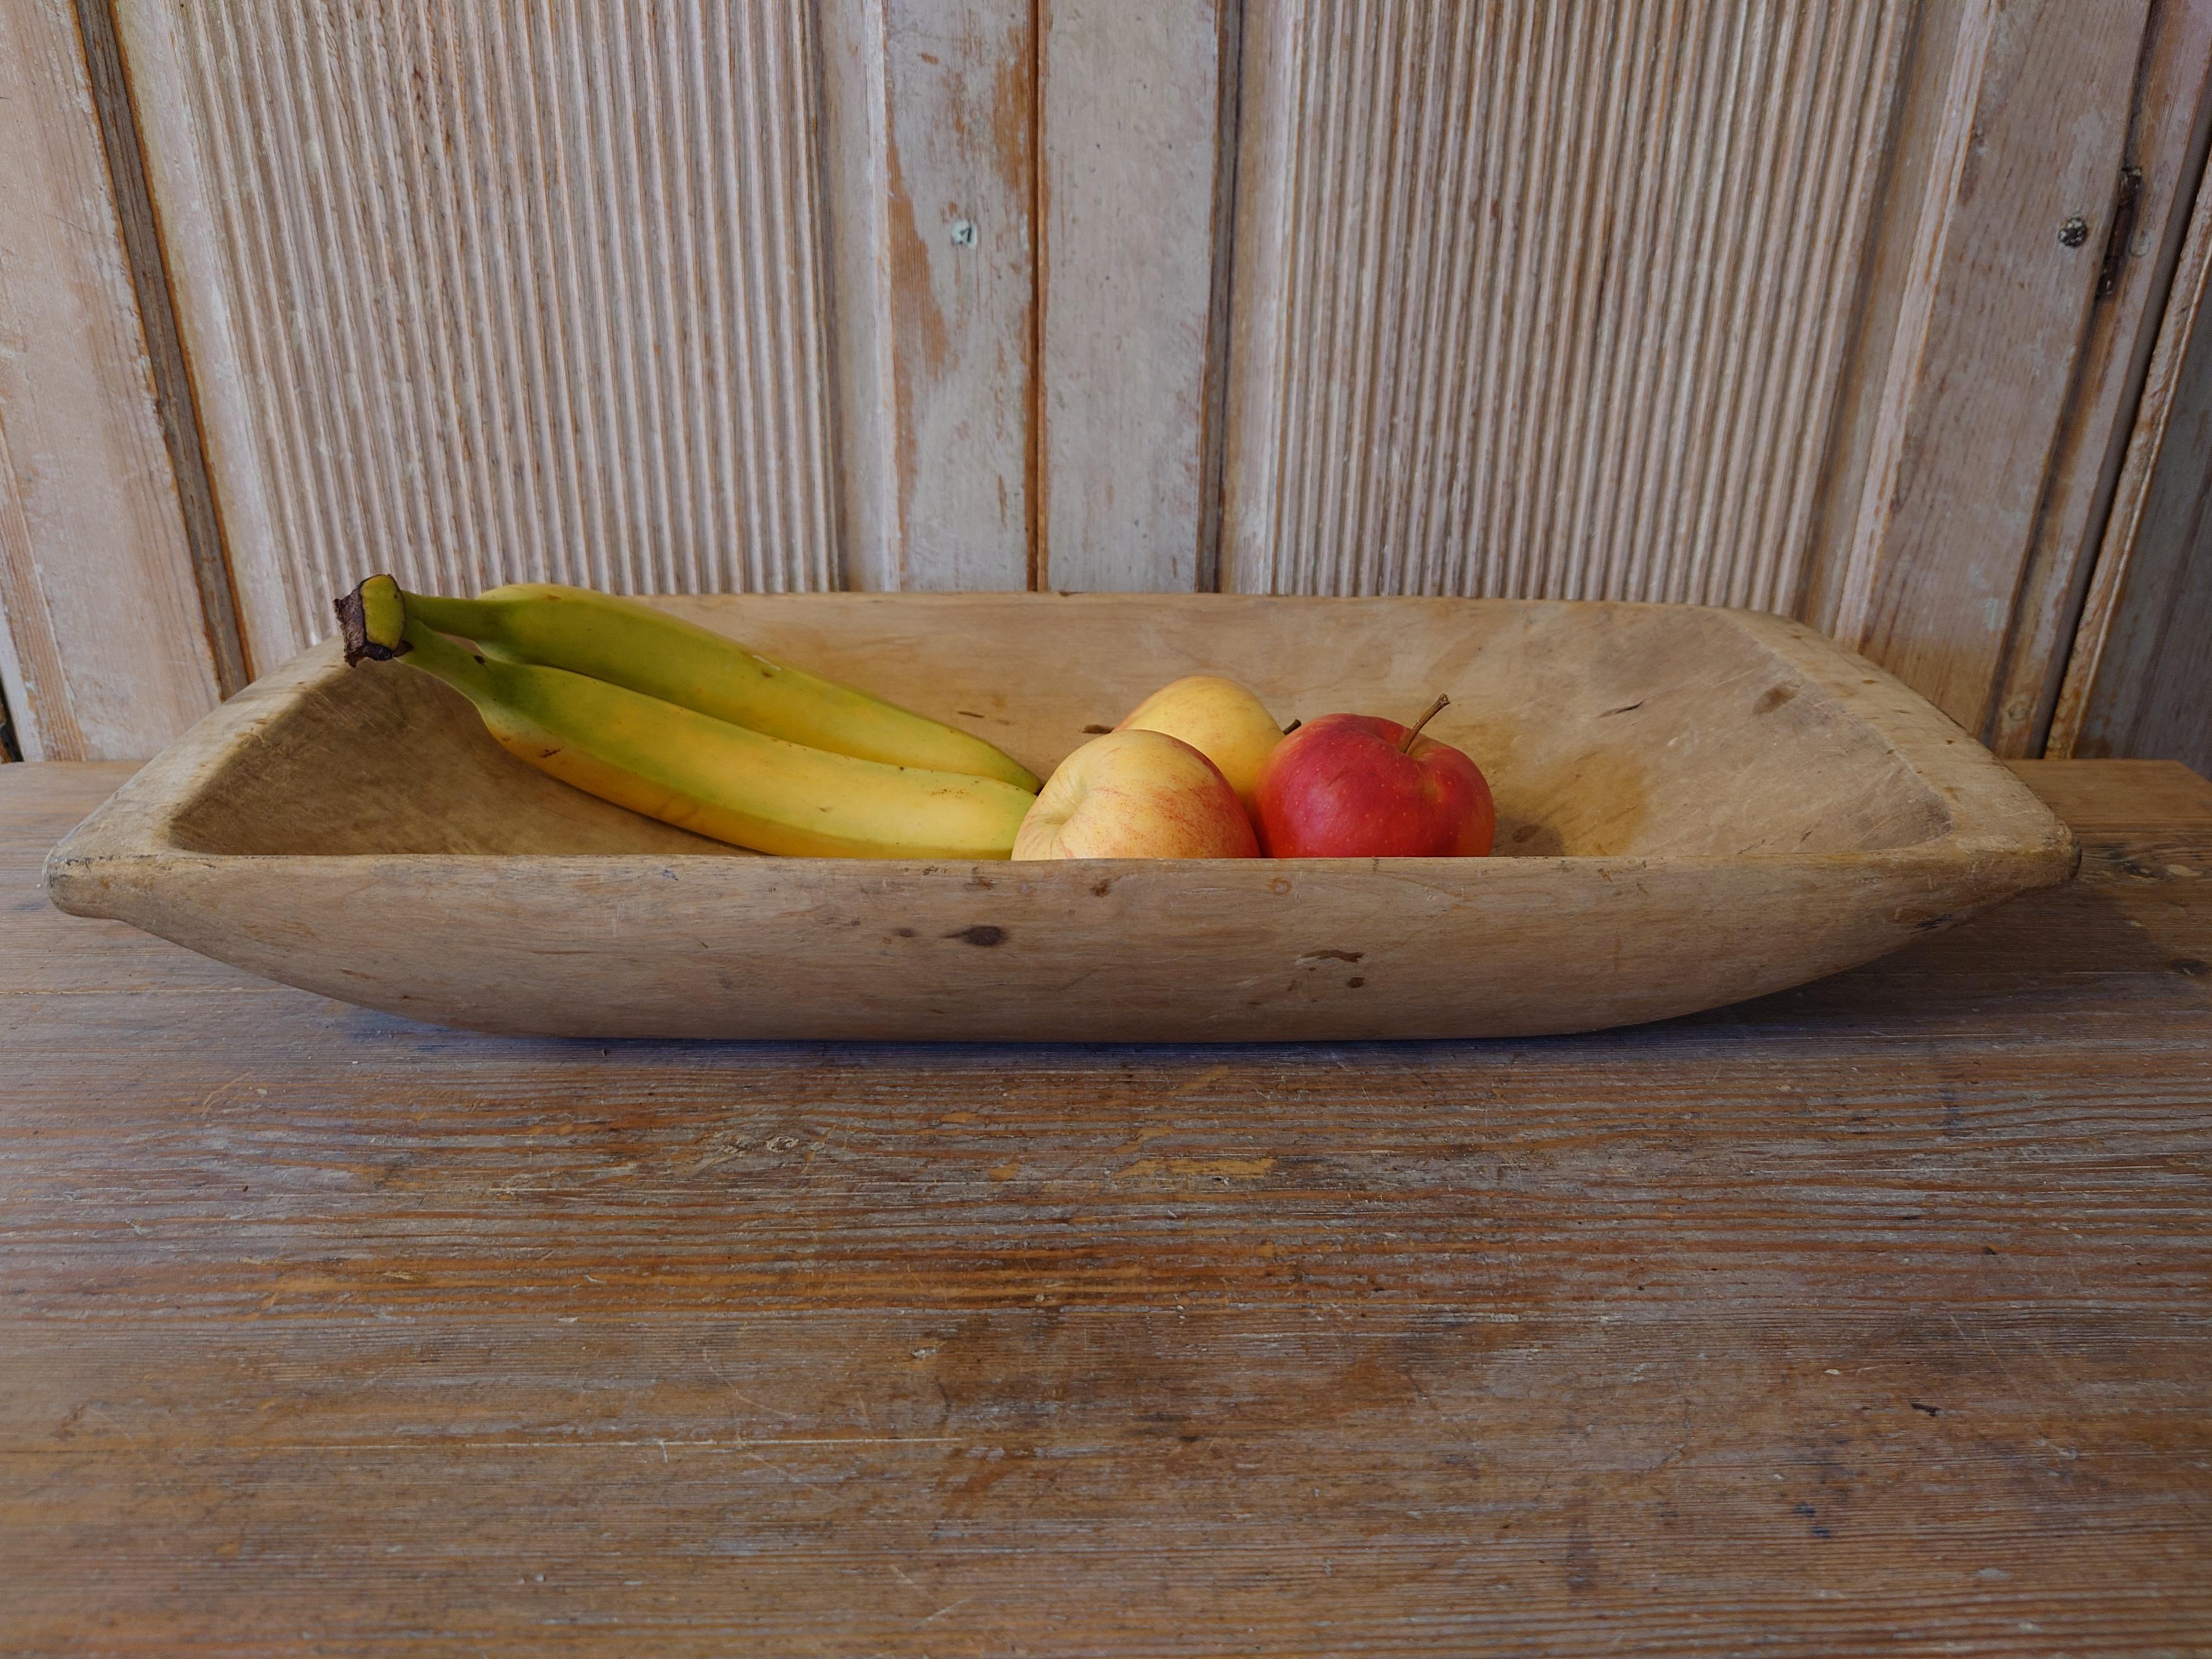 19th century antique rustic Swedish antique wooden tray/  Serving bowl from Boden ,Northern Sweden .
A farmers handcrafted tray or serving bowl or centerpiece.
A highly functional object with sculptural appearance.
Time has patinated the surface to